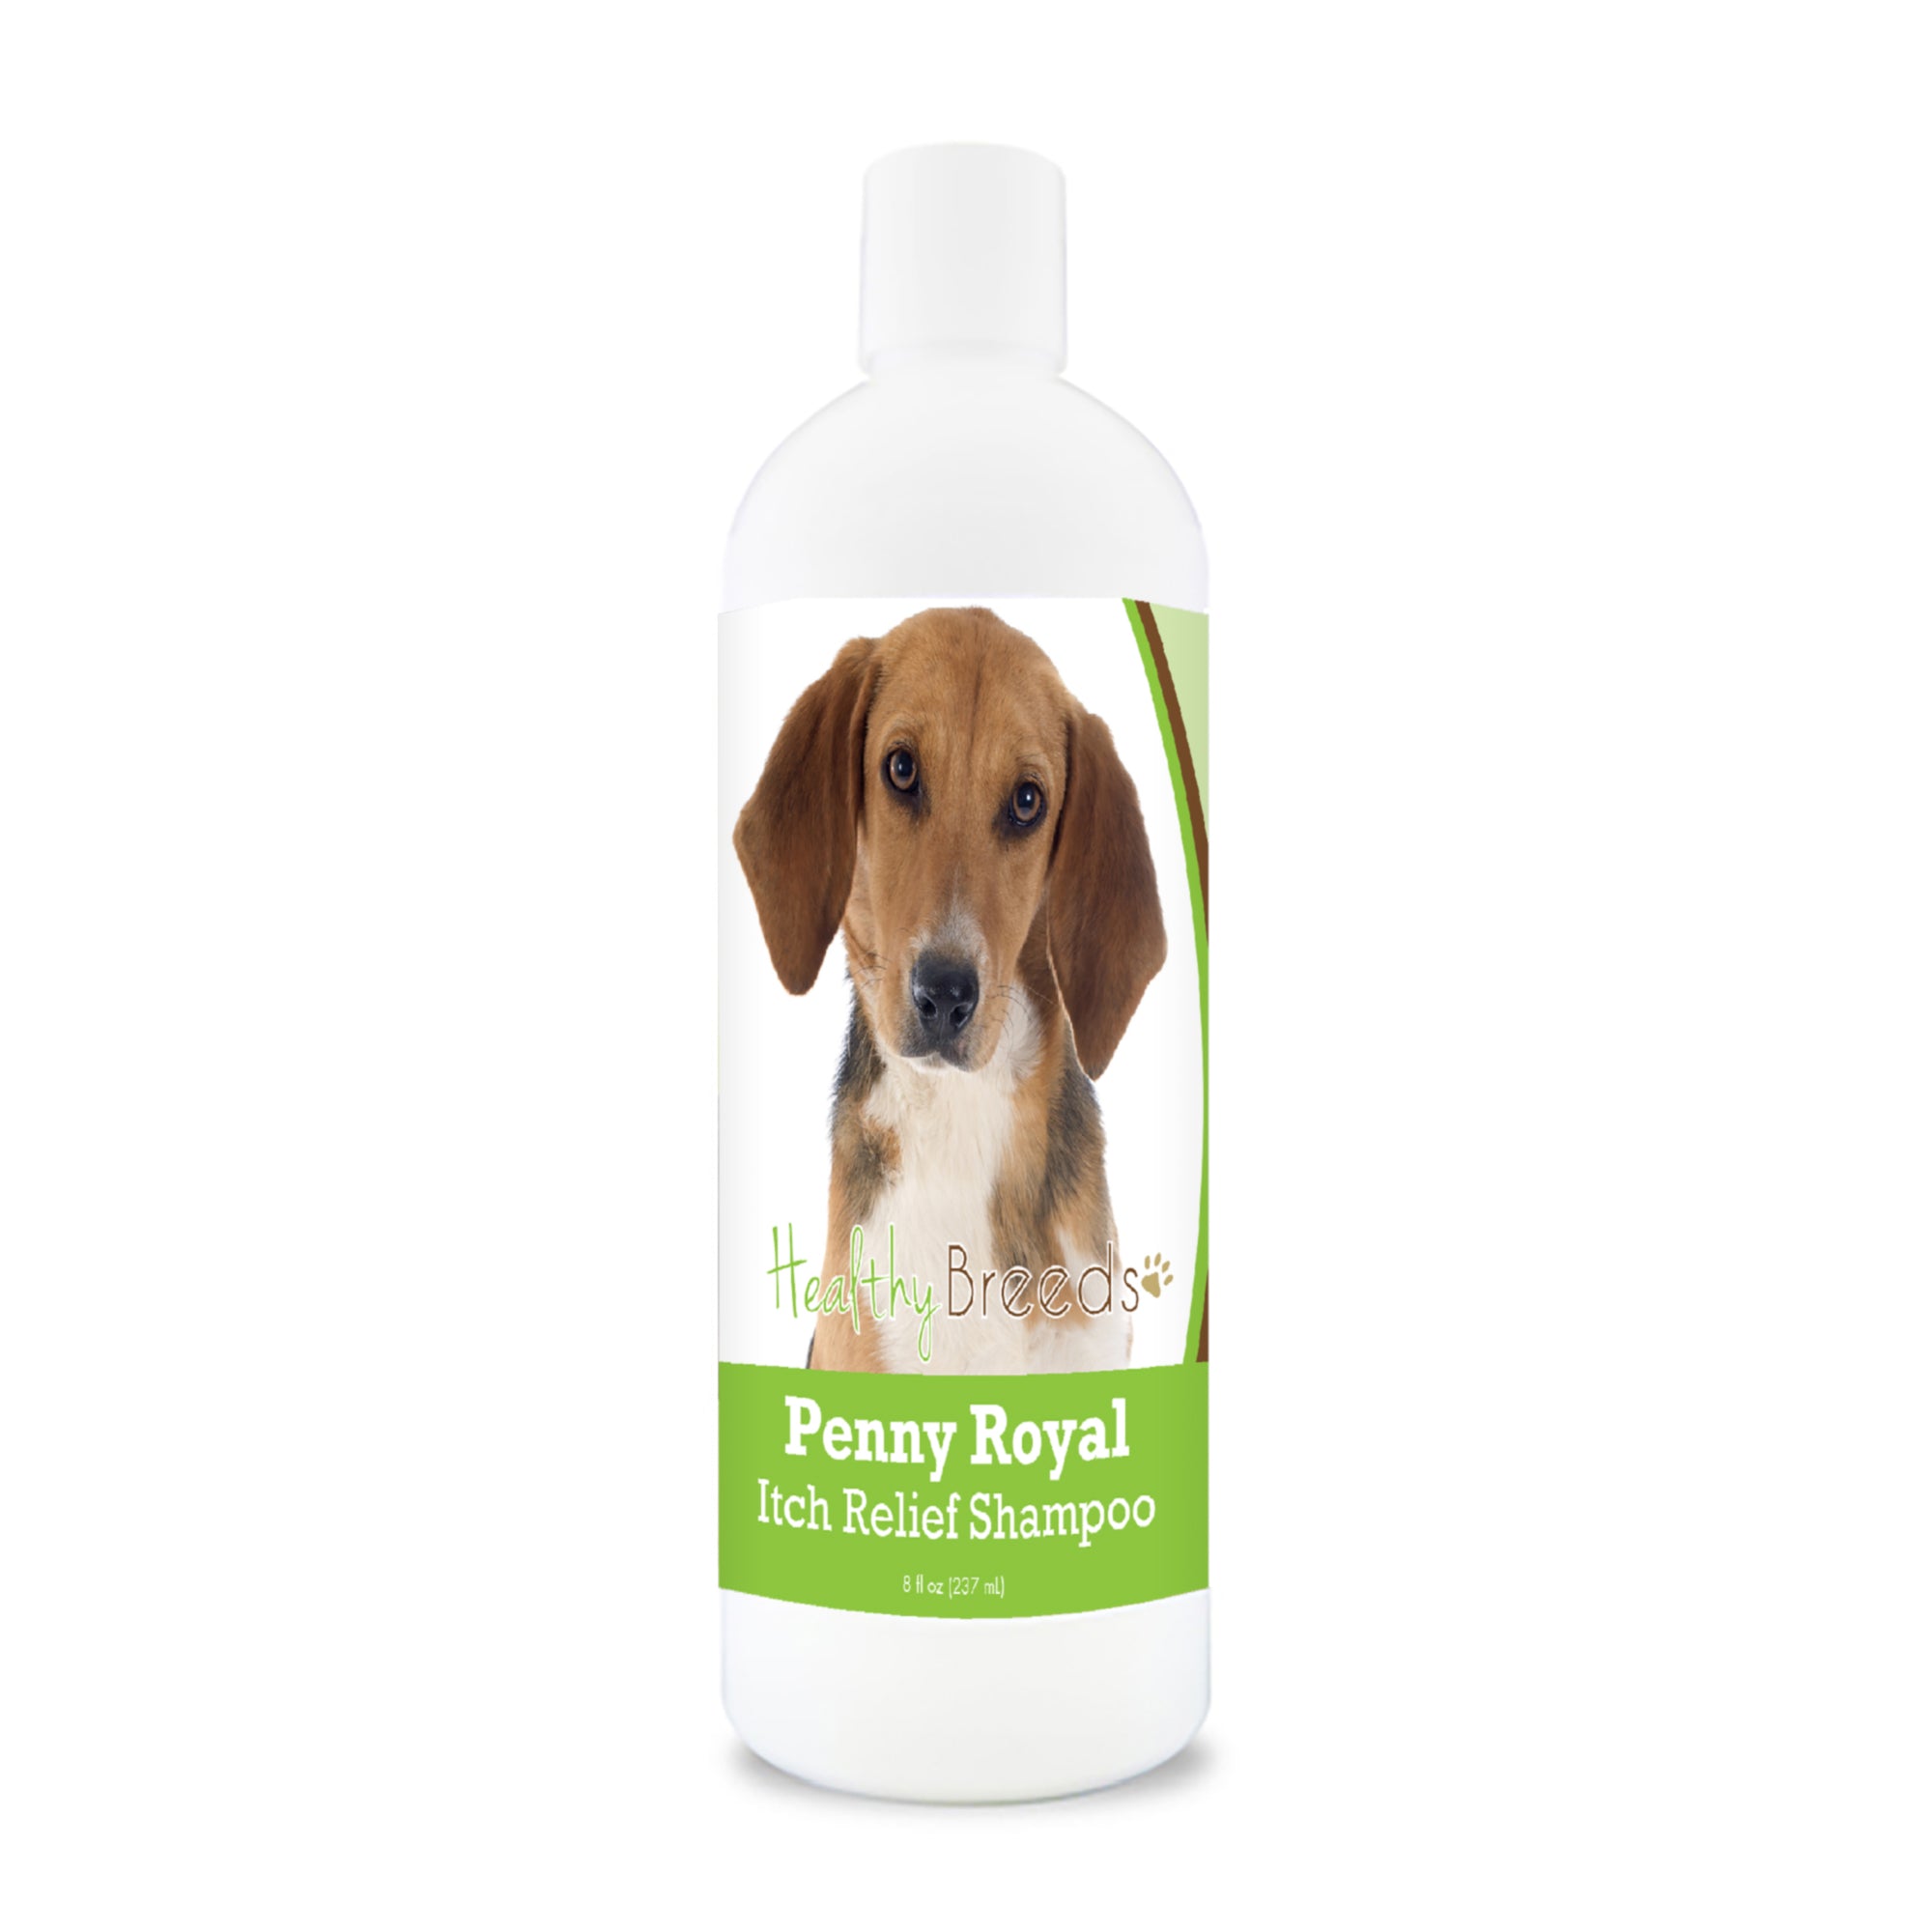 Harrier Penny Royal Itch Relief Shampoo 8 oz